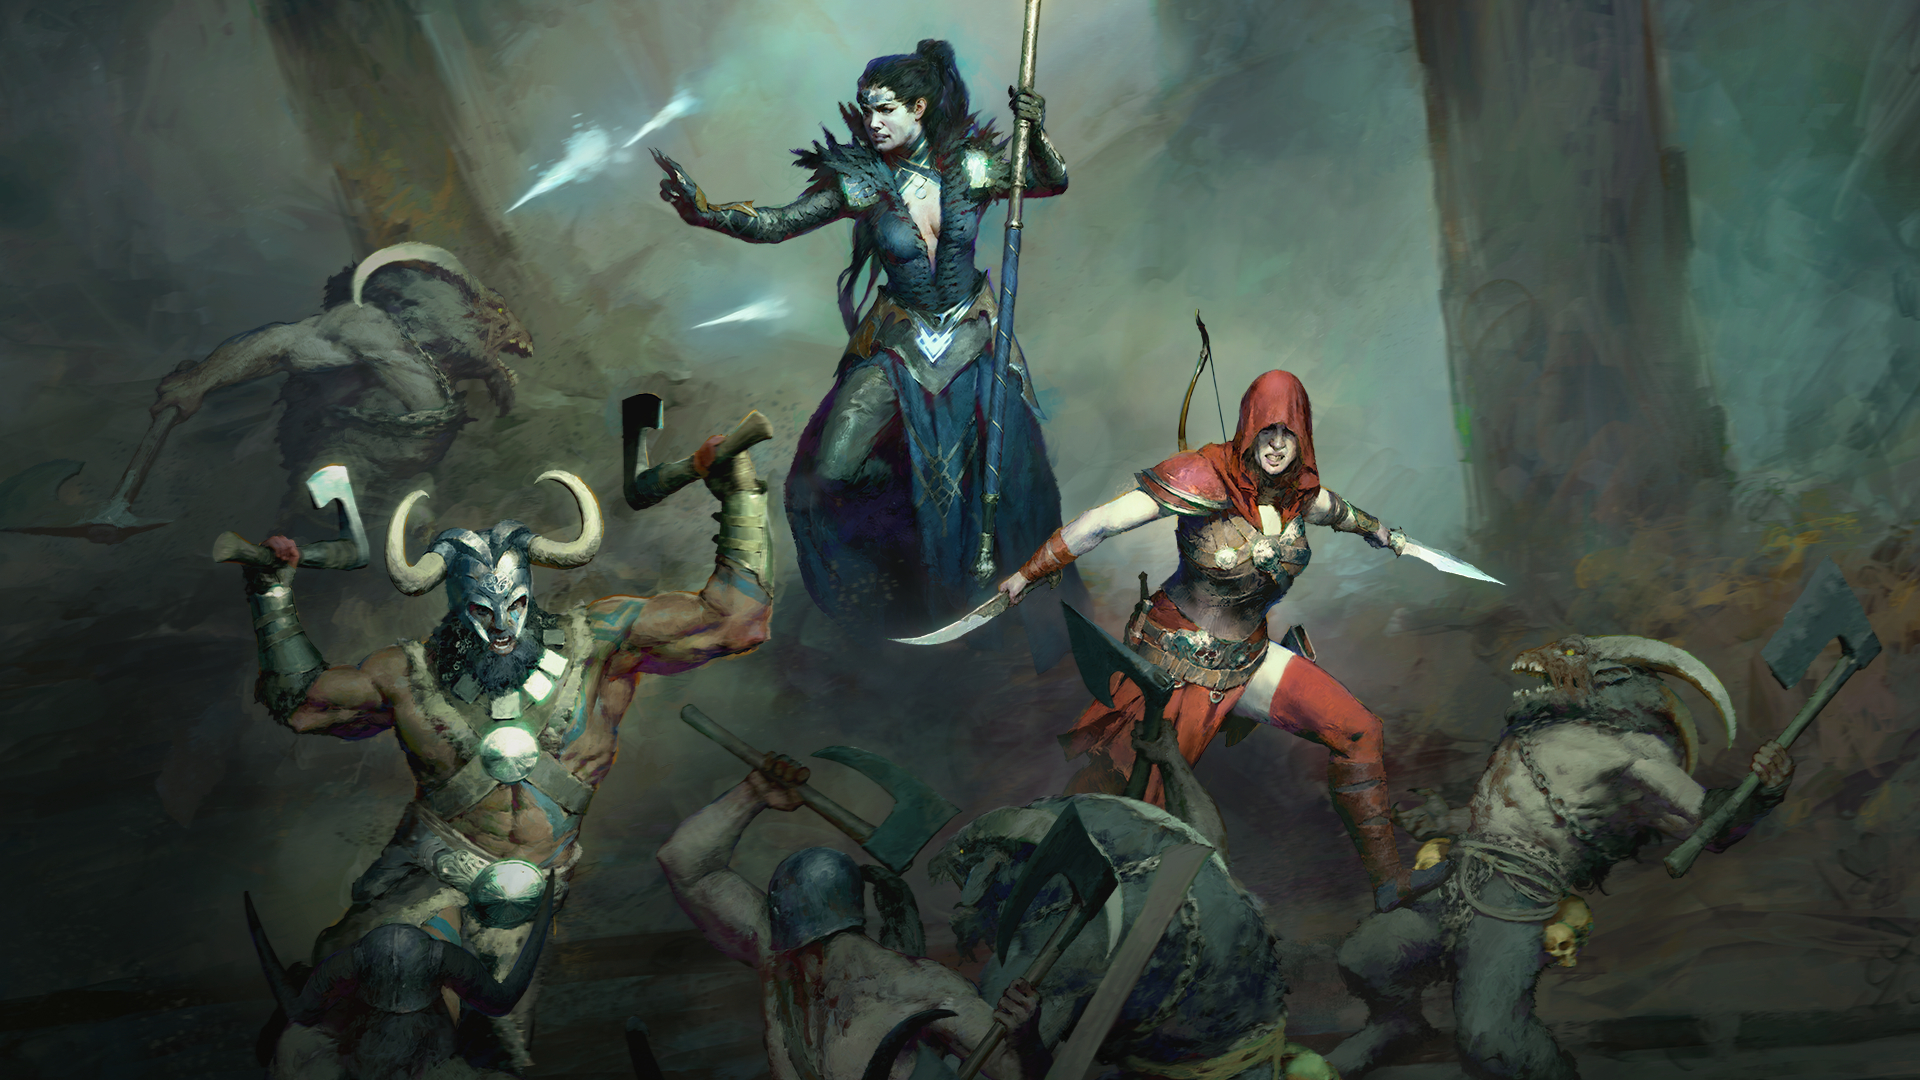 Diablo 4 — An illustration of Diablo 4 character classes in combat, with a Rogue, a Barbarian, and a Sorcerer fighting goatmen and cultists.